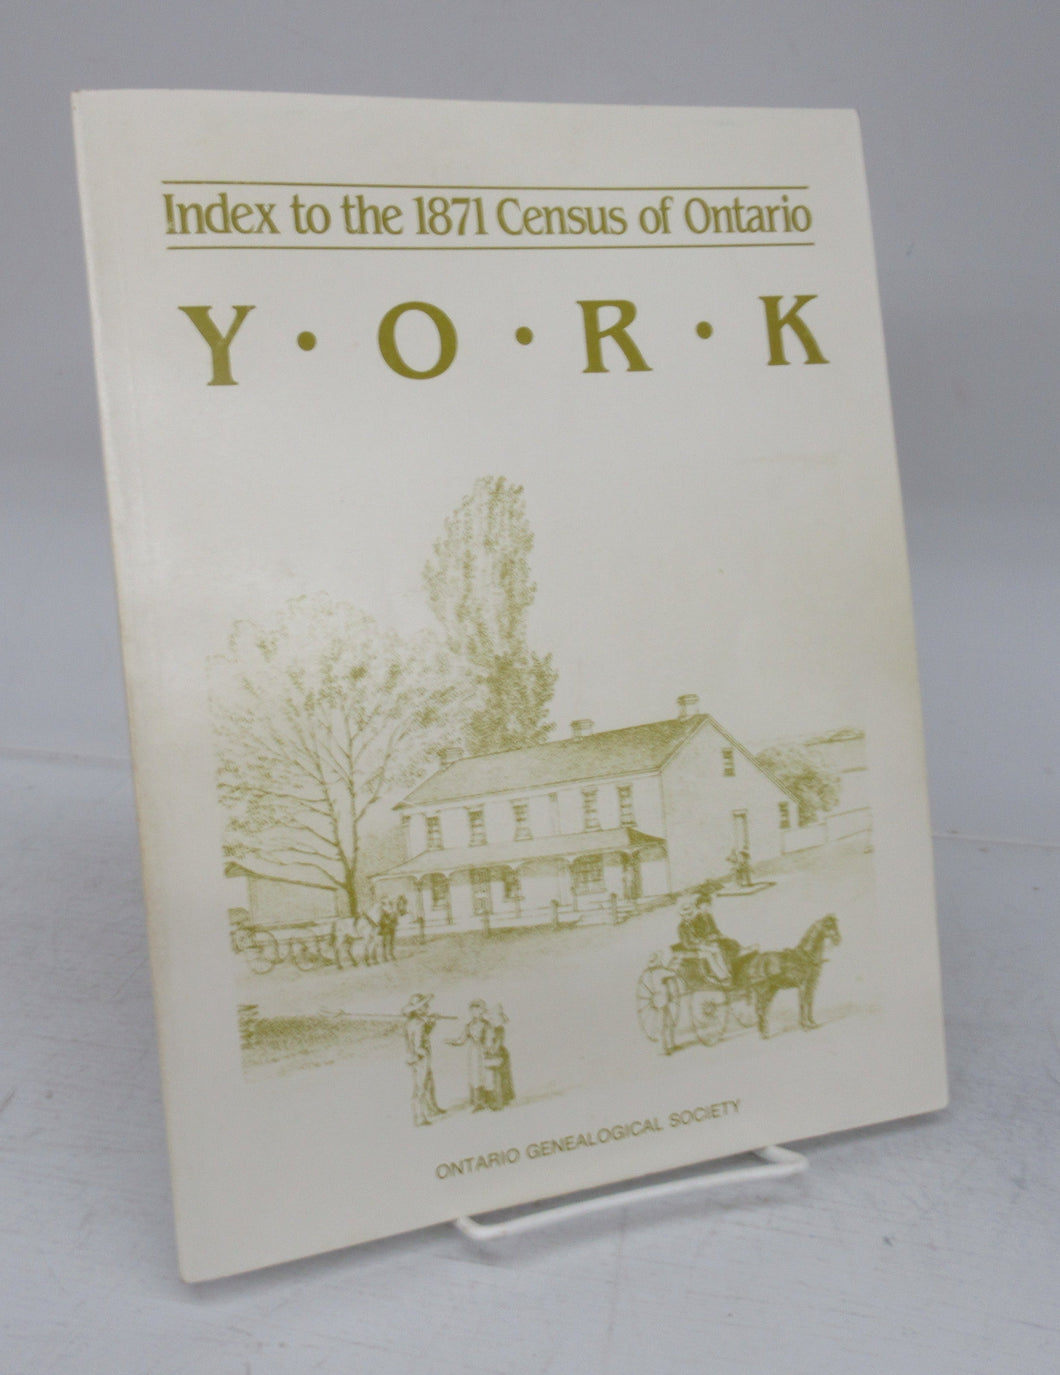 Index to the 1871 Census of Ontario: York